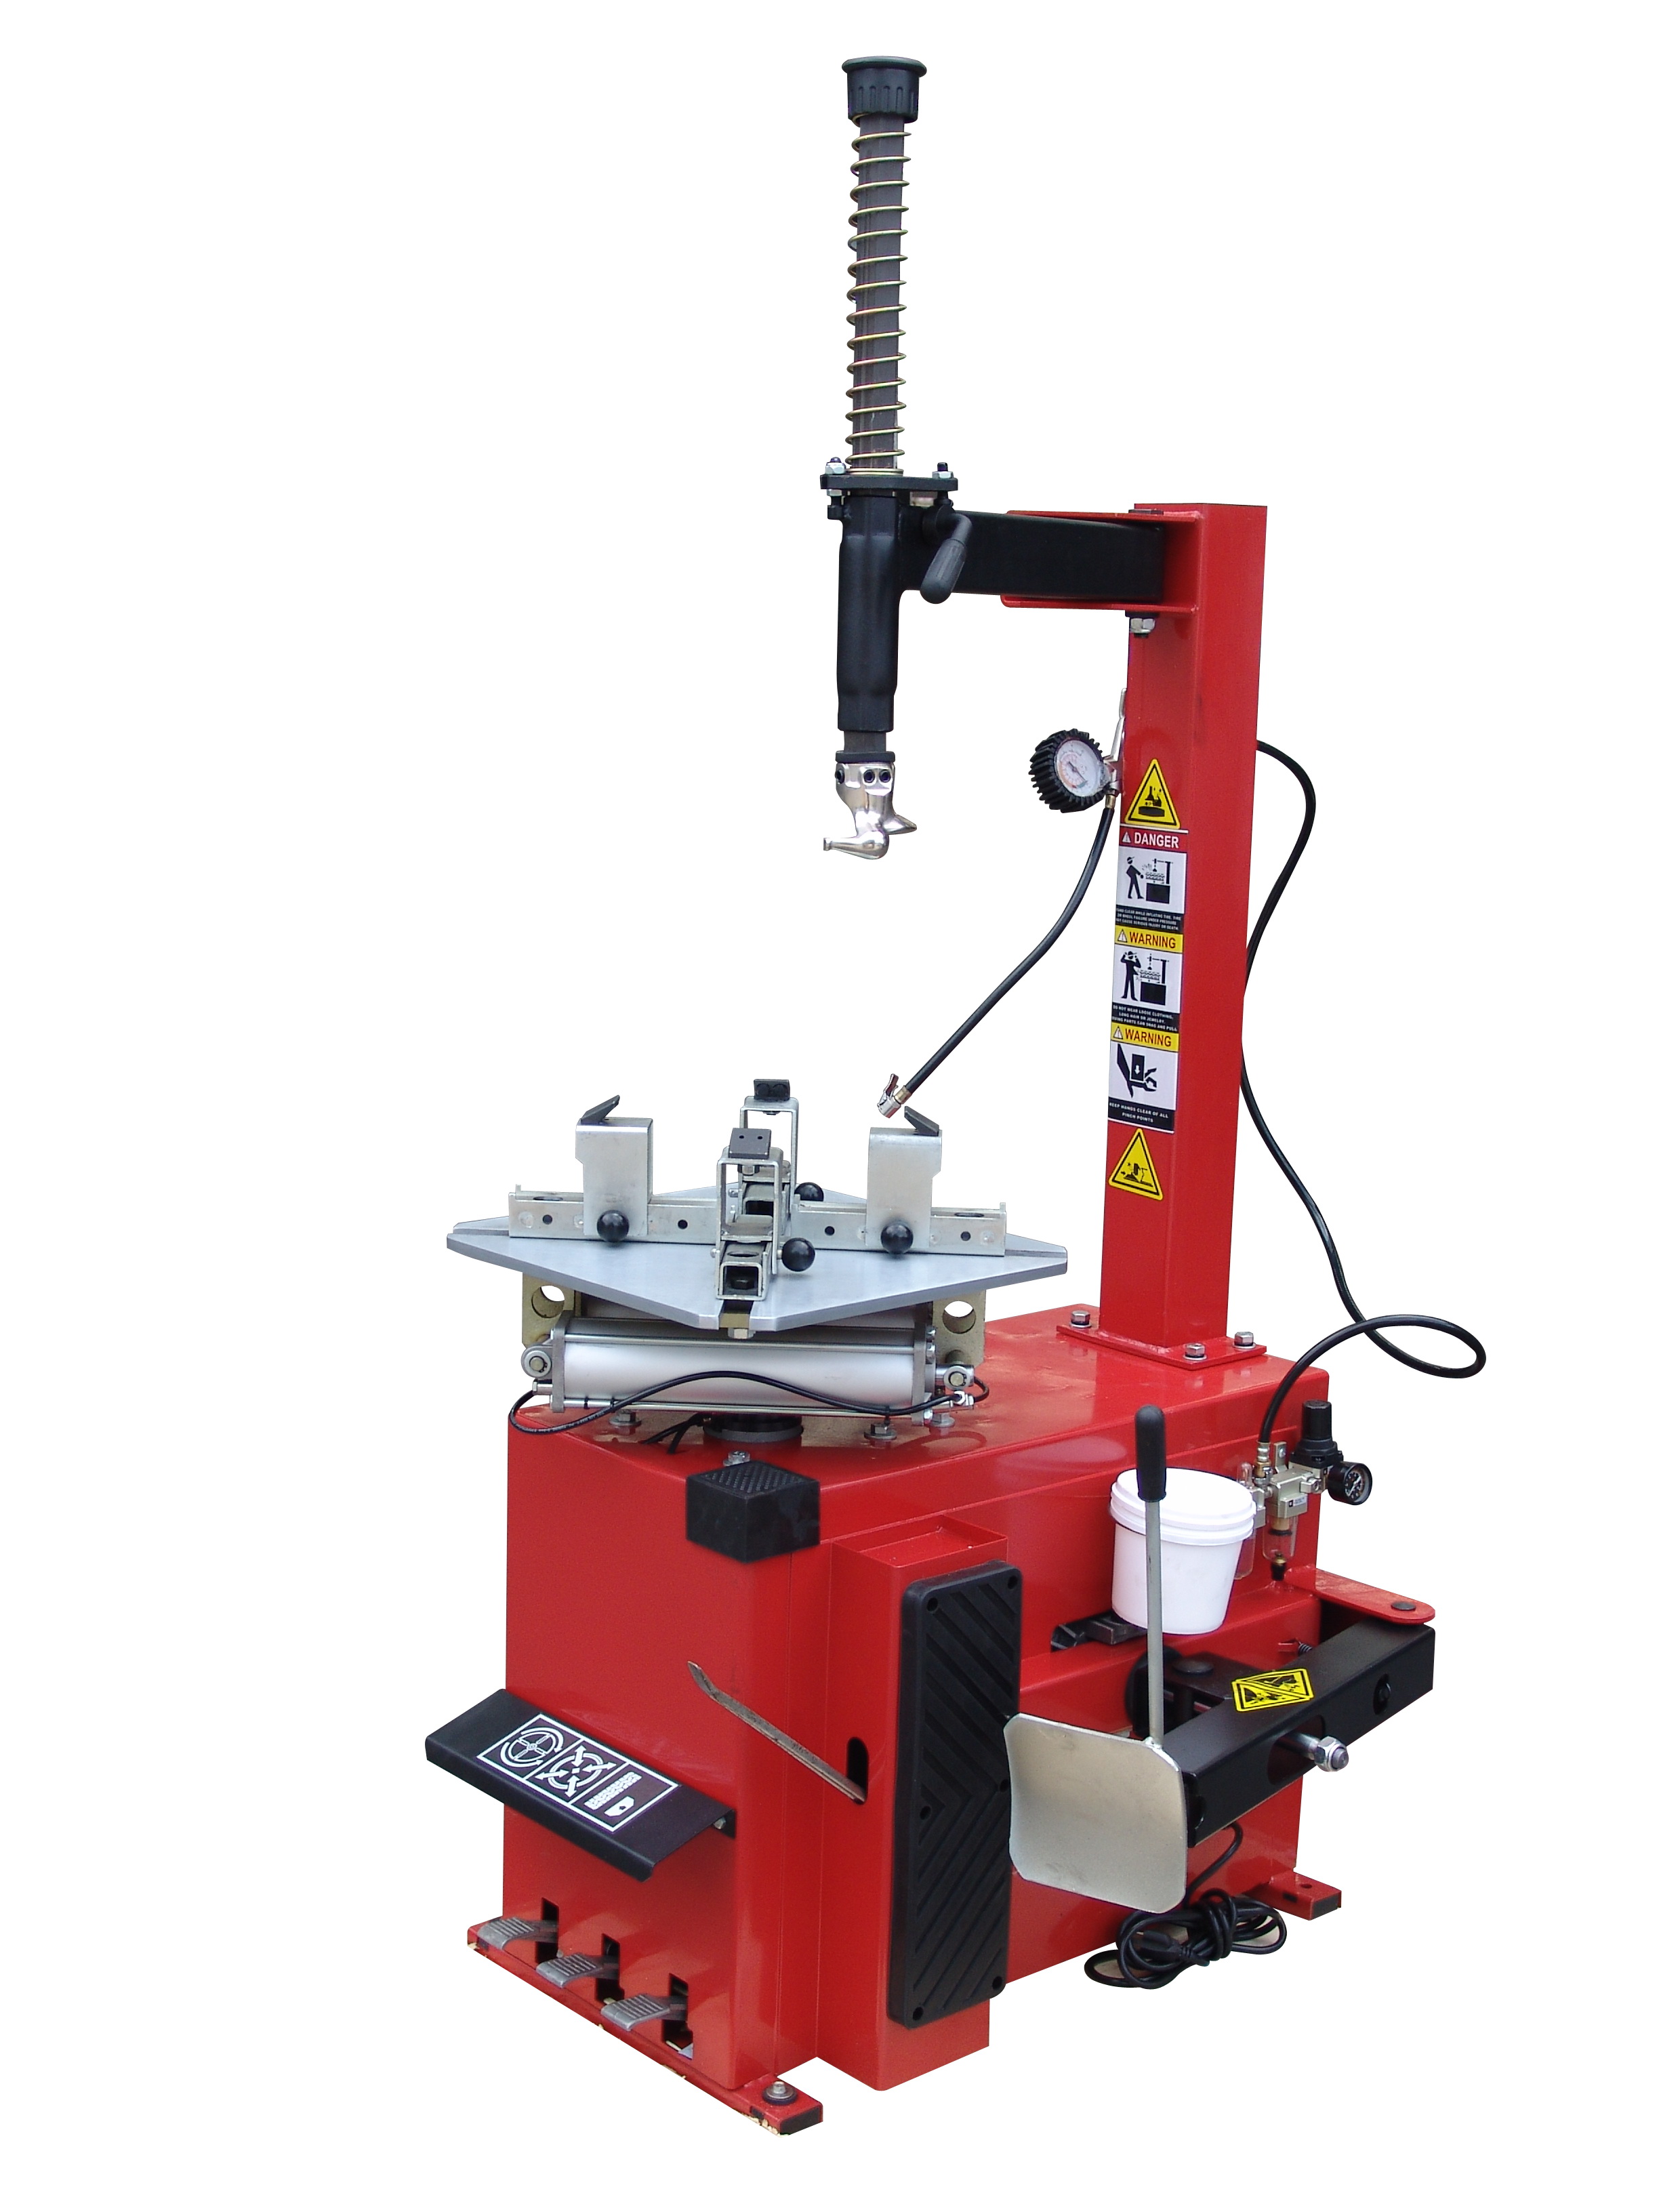 TC-400M-B Automatic, Rim-Clamp style Motorcycle Tire Changer